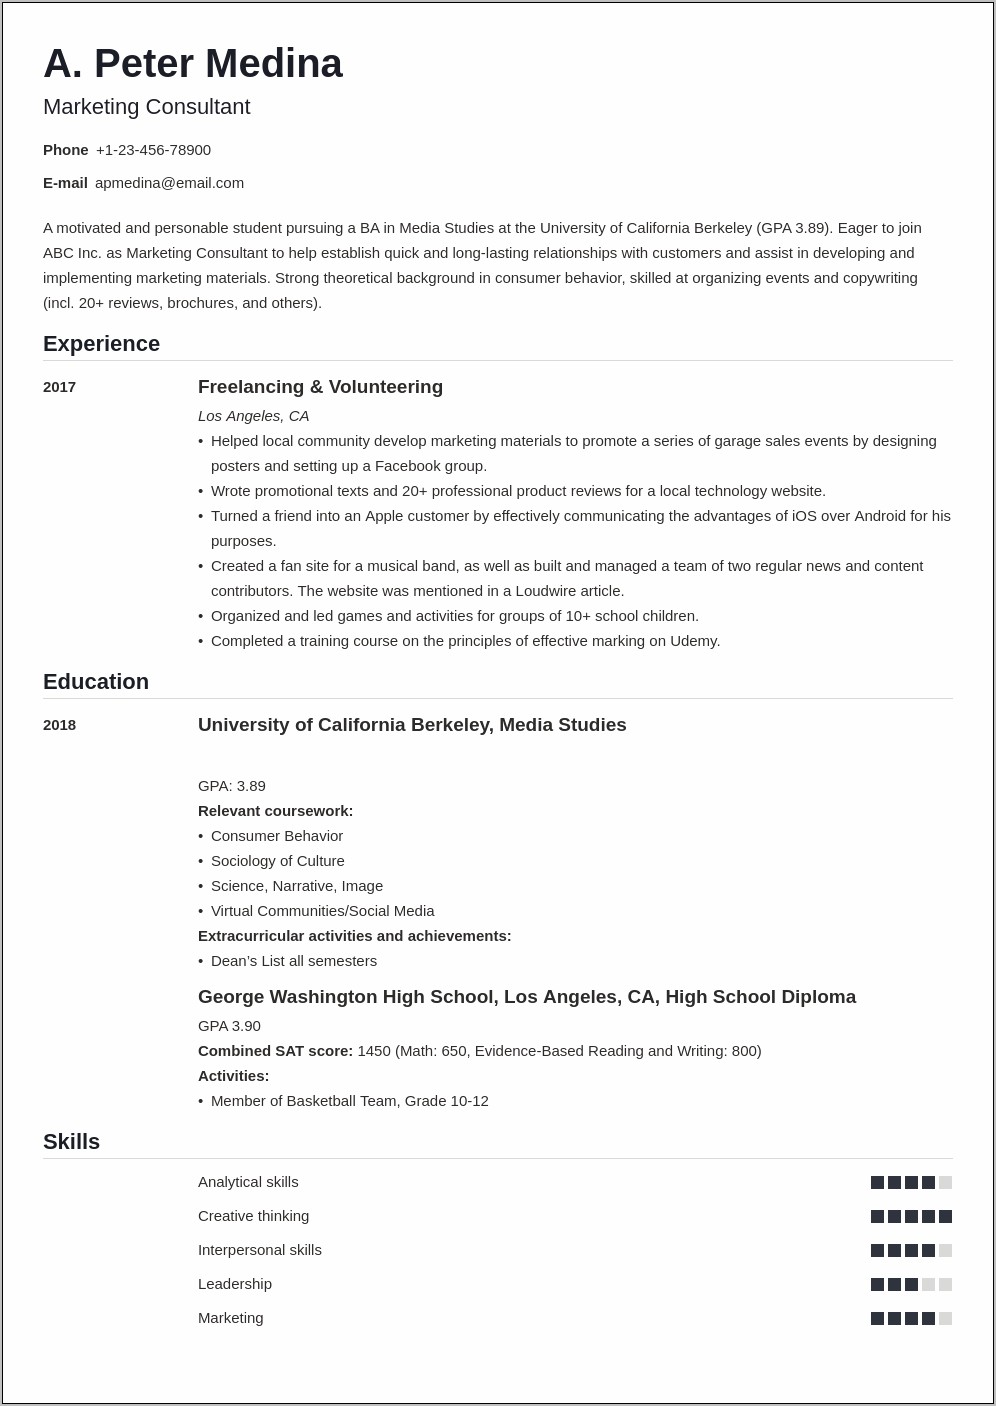 Resume Demonstrating Experiences And Skills